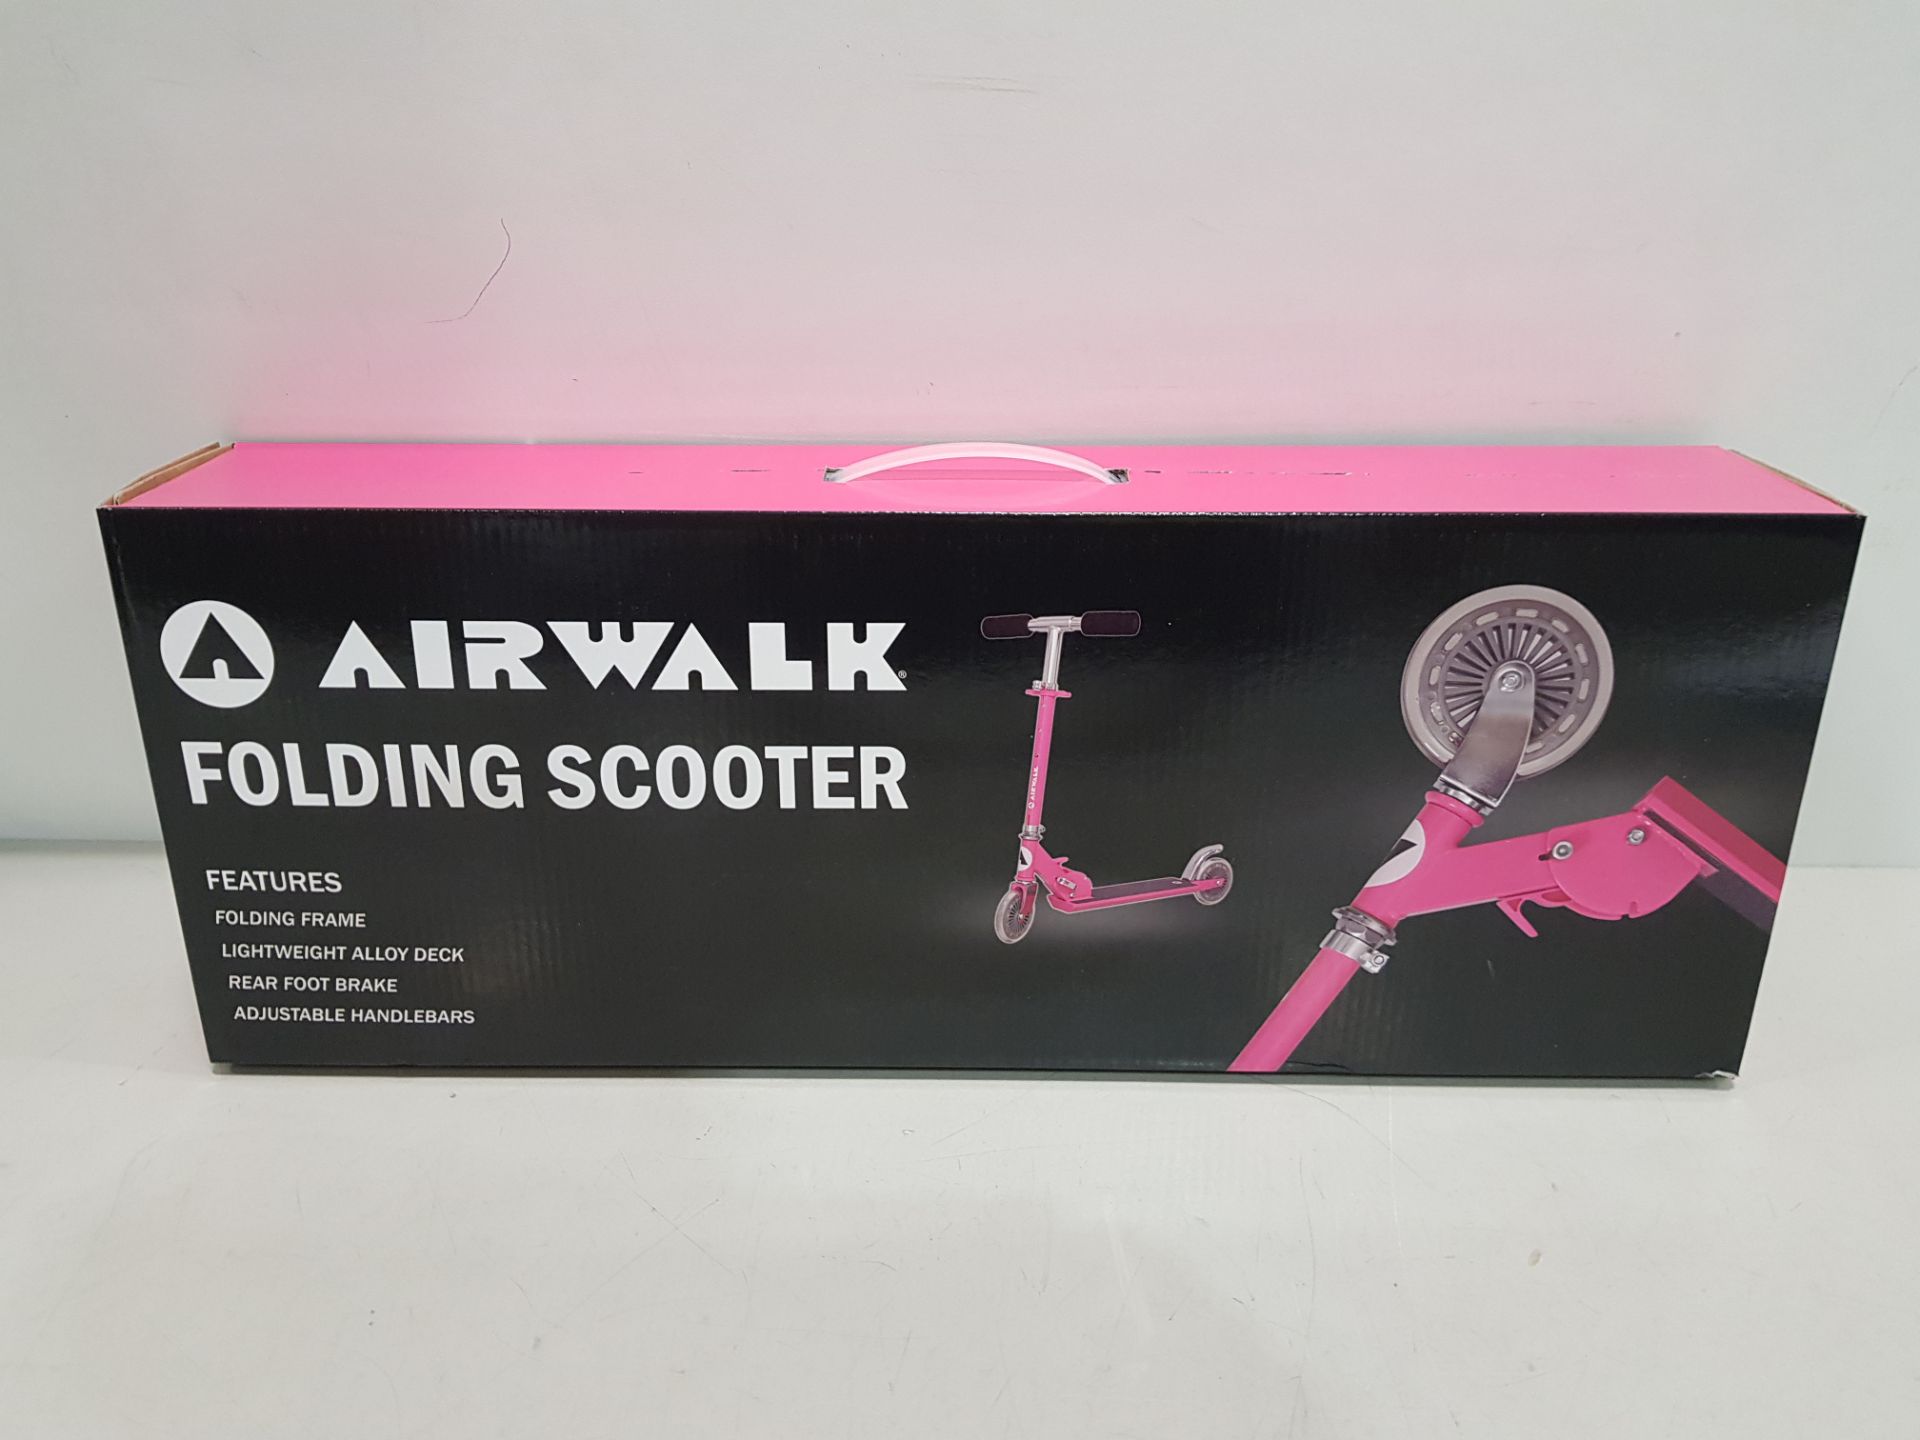 12 X BRAND NEW AIRWALK FOLDING SCOOTERS - ALL IN JUNIOR SIZE - ALL IN PINK COLOUR - IN 2 BOXES OF 6